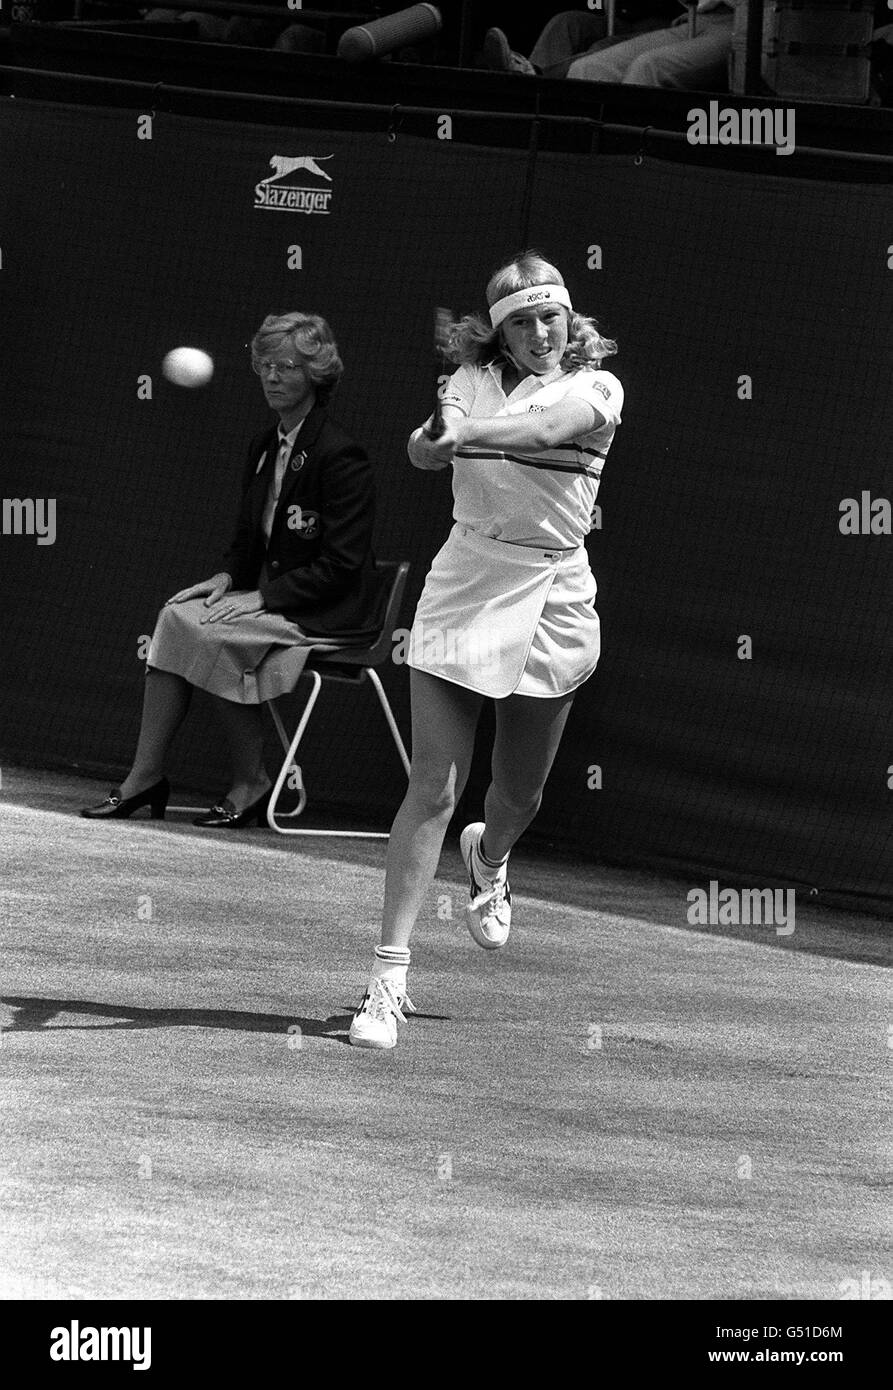 America's Andrea Jaeger, 18, in action on Centre Court against Czechoslovakia's Martina Navratilova during Wimbledon. Navratilova defeated Jaeger 6-0, 6-3 in just 54 minutes to retain her championship, her fourth in all. Stock Photo